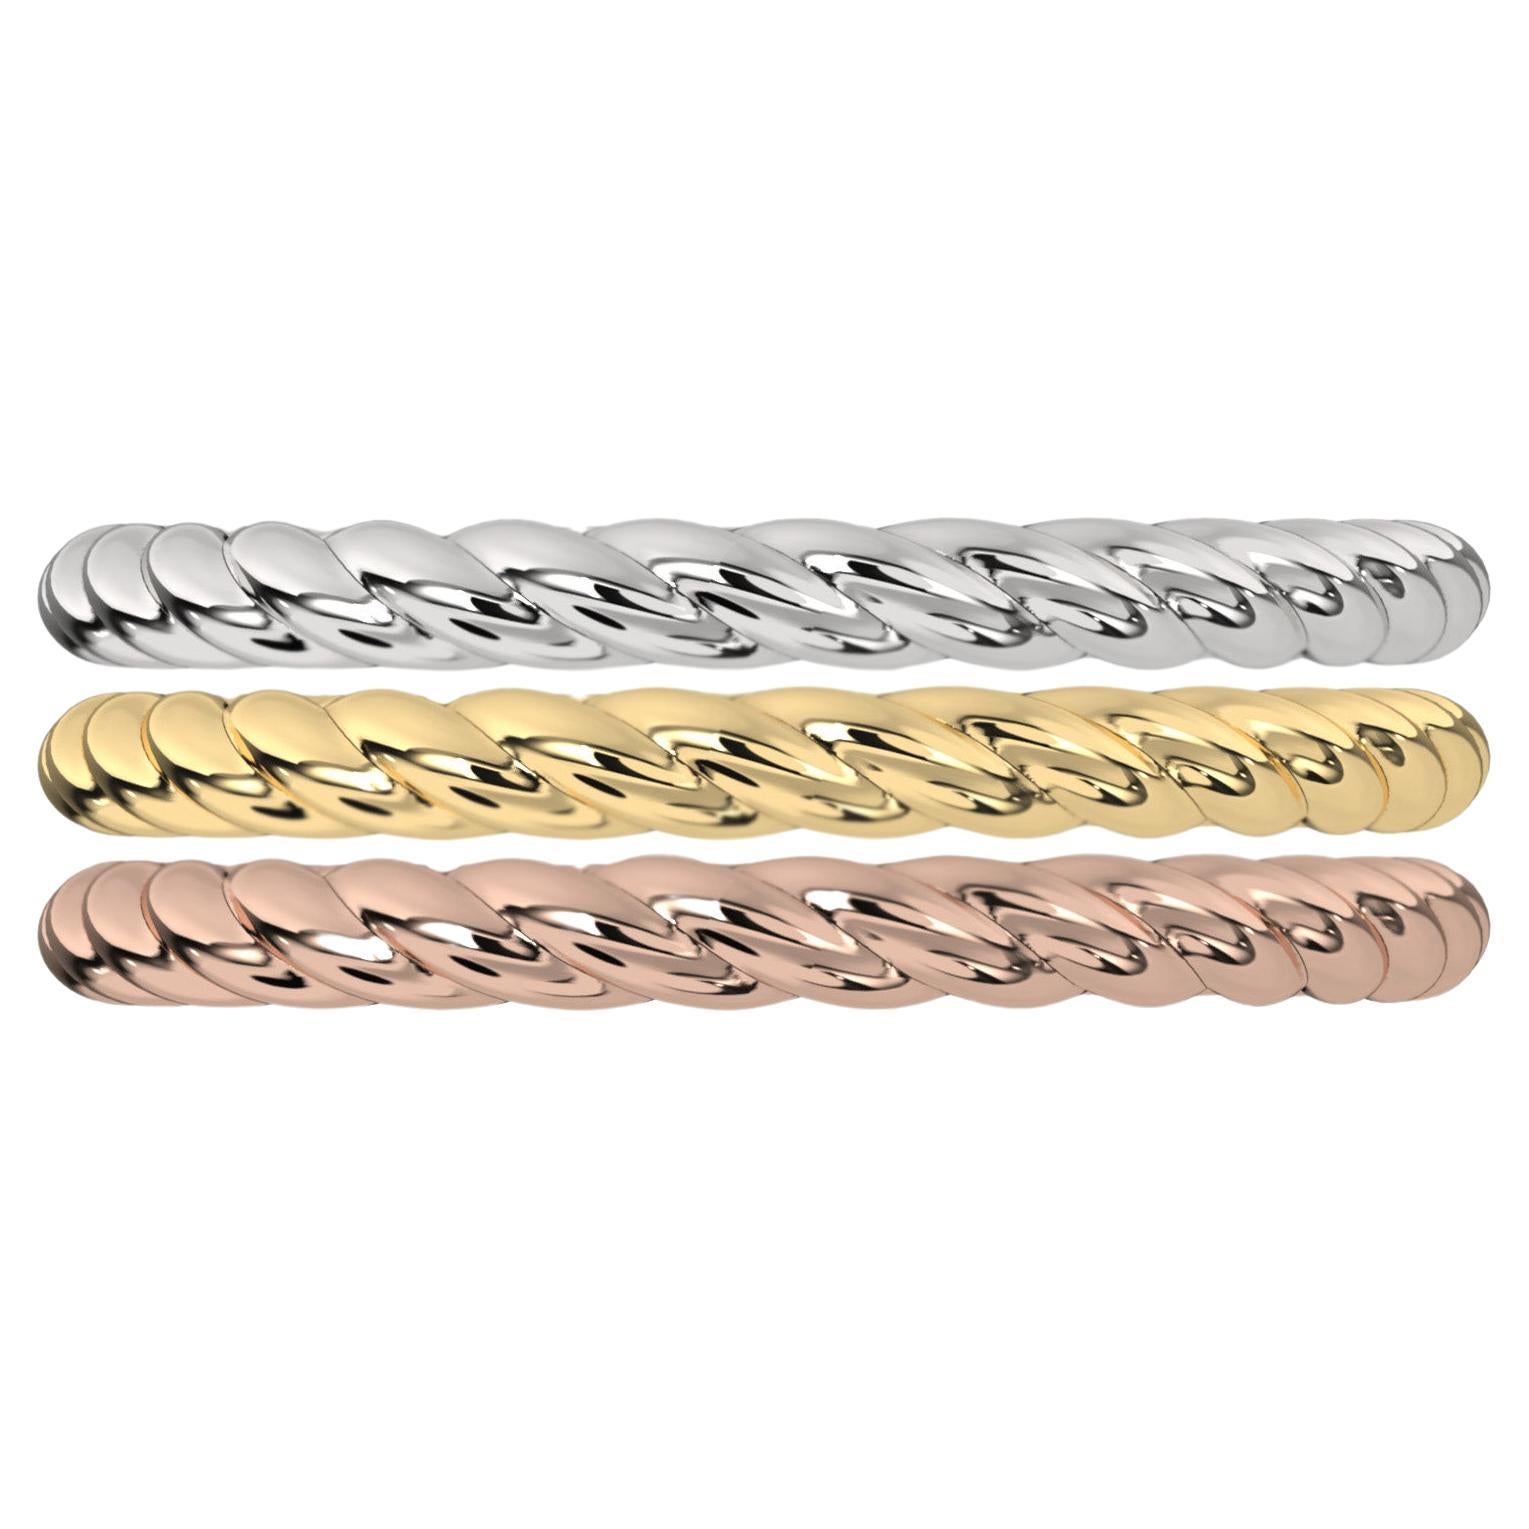 BY ORDER: Twisted Band Ring in 18 Karat White Gold, Yellow Gold, Rose Gold